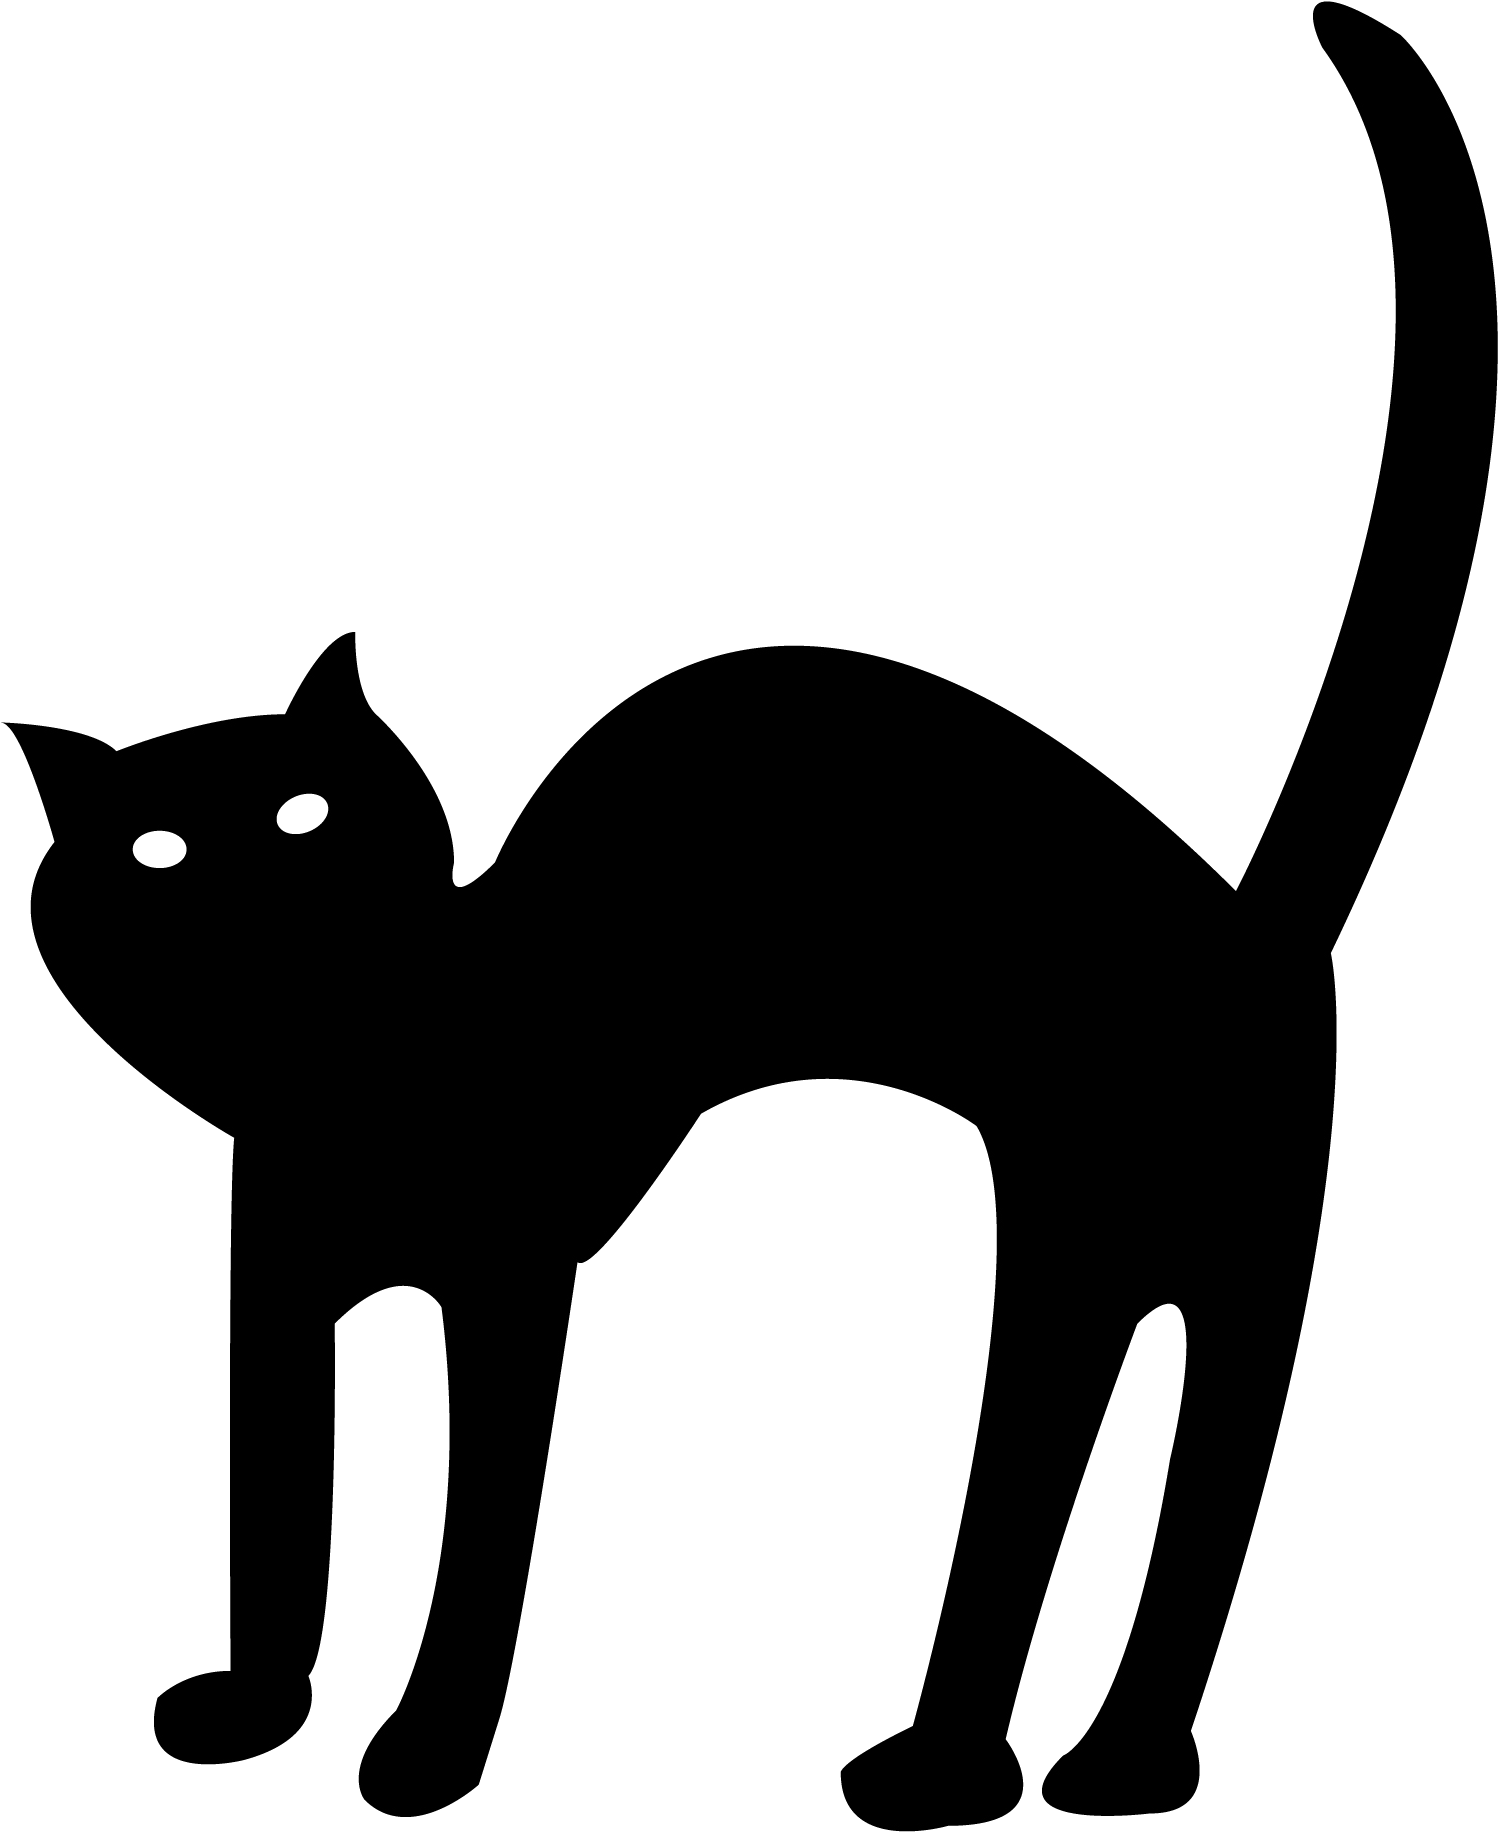 Black Cat Silhouette Graphic PNG